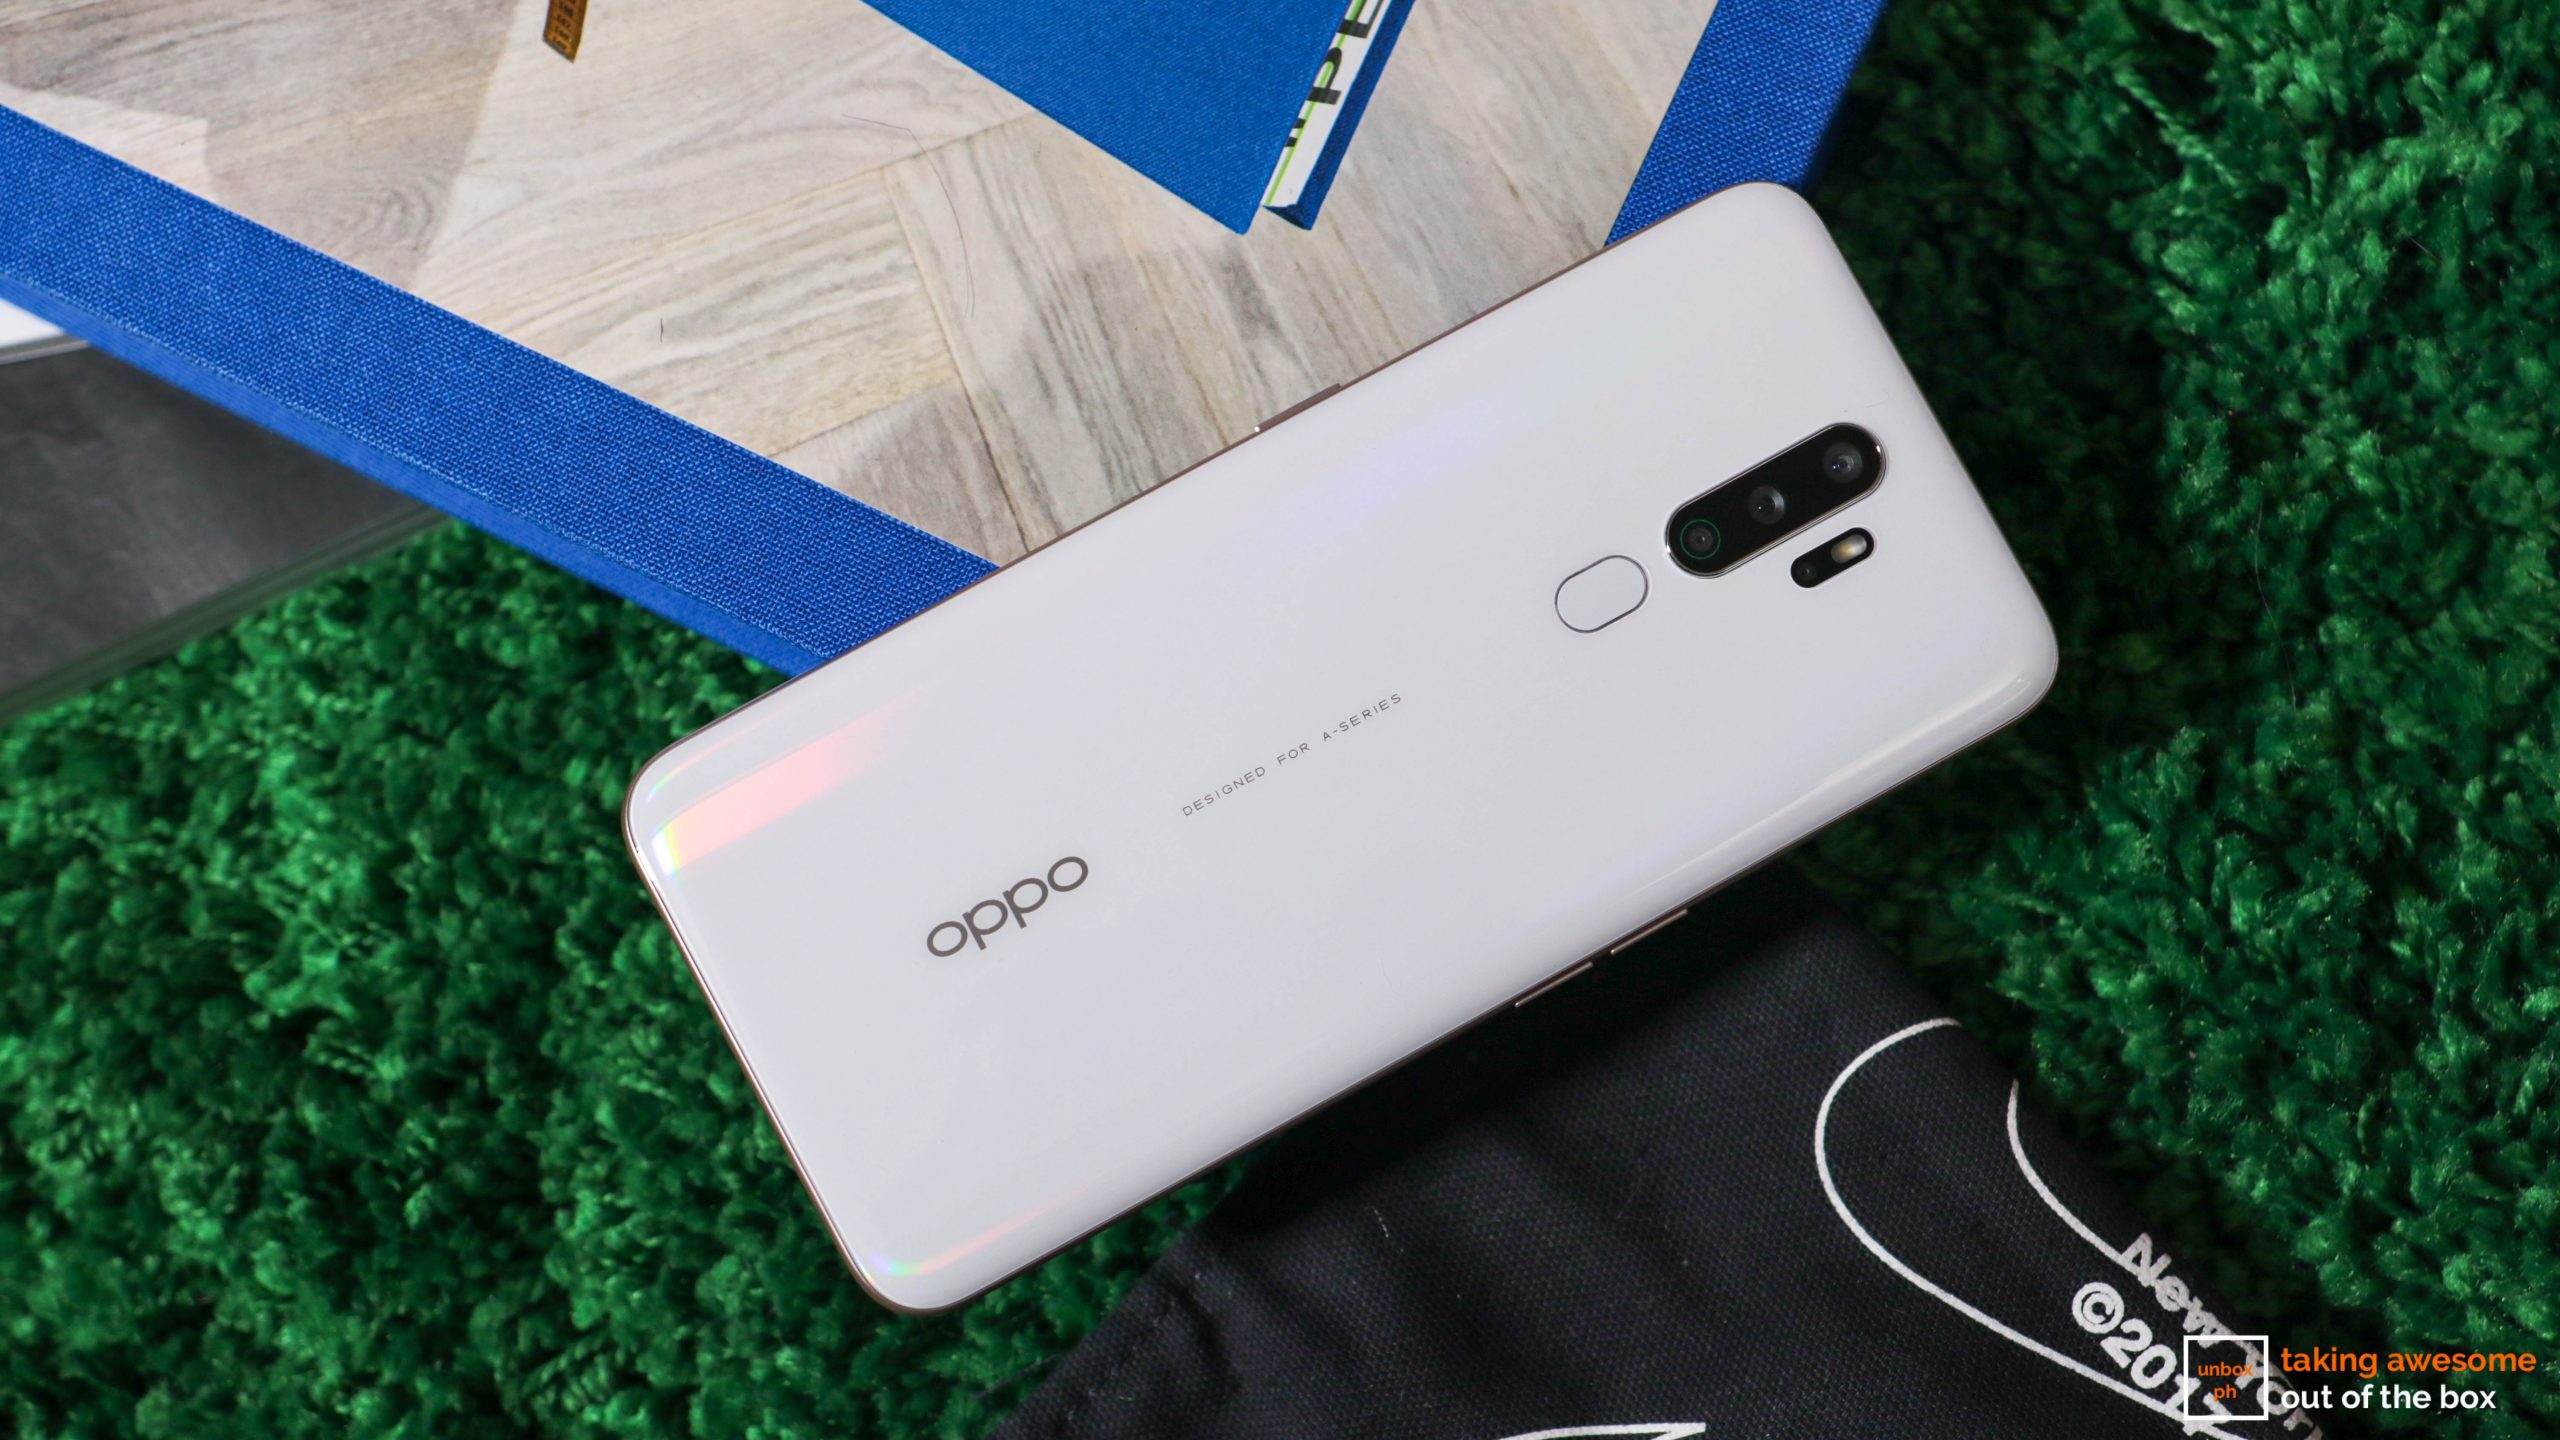 Oppo A5 2020 unboxing and overview 